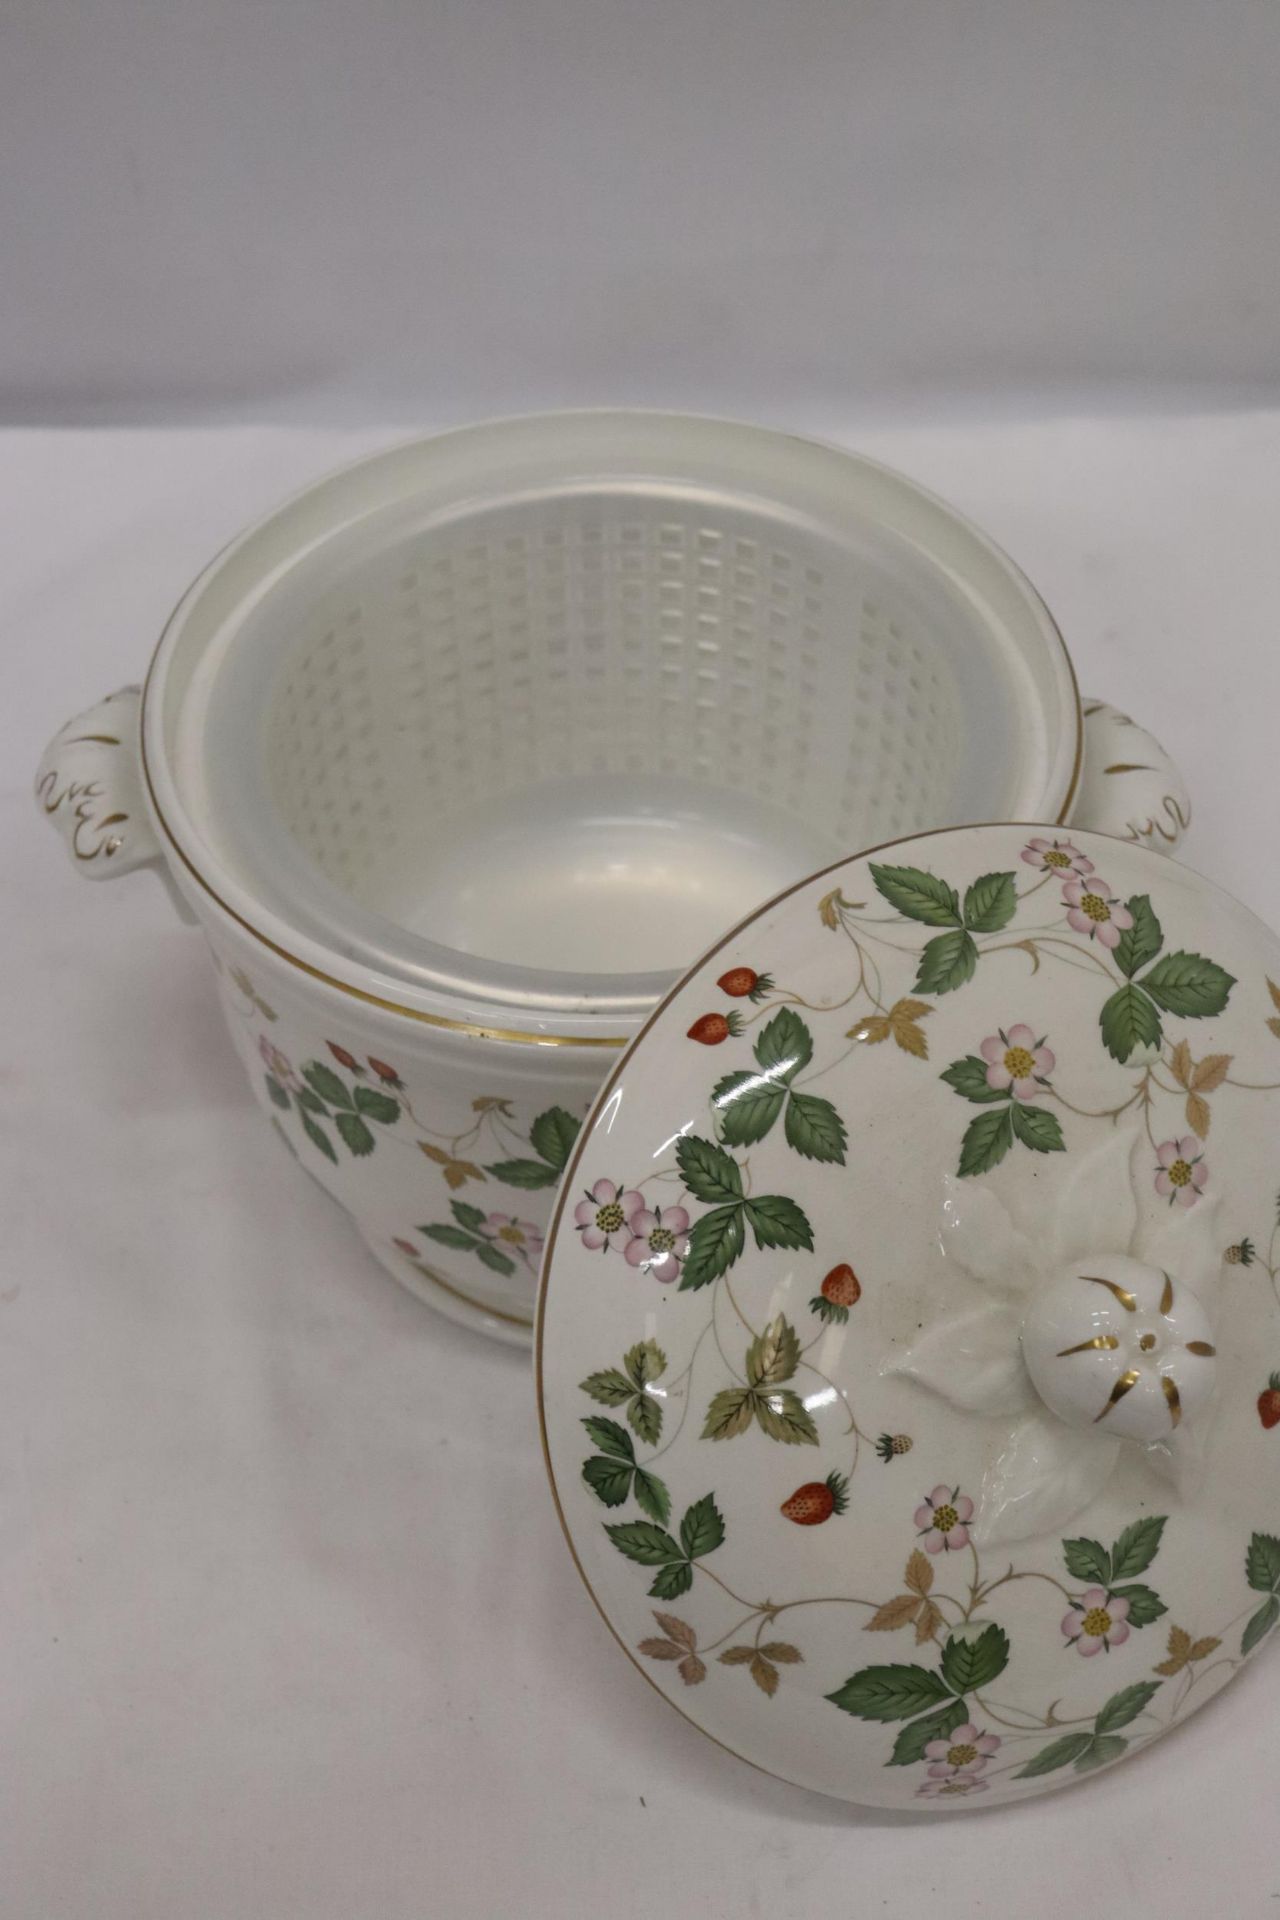 A CERAMIC WEDGWOOD 'WILD STRAWBERRY' ICE BUCKET WITH INNER LINER - Image 3 of 6